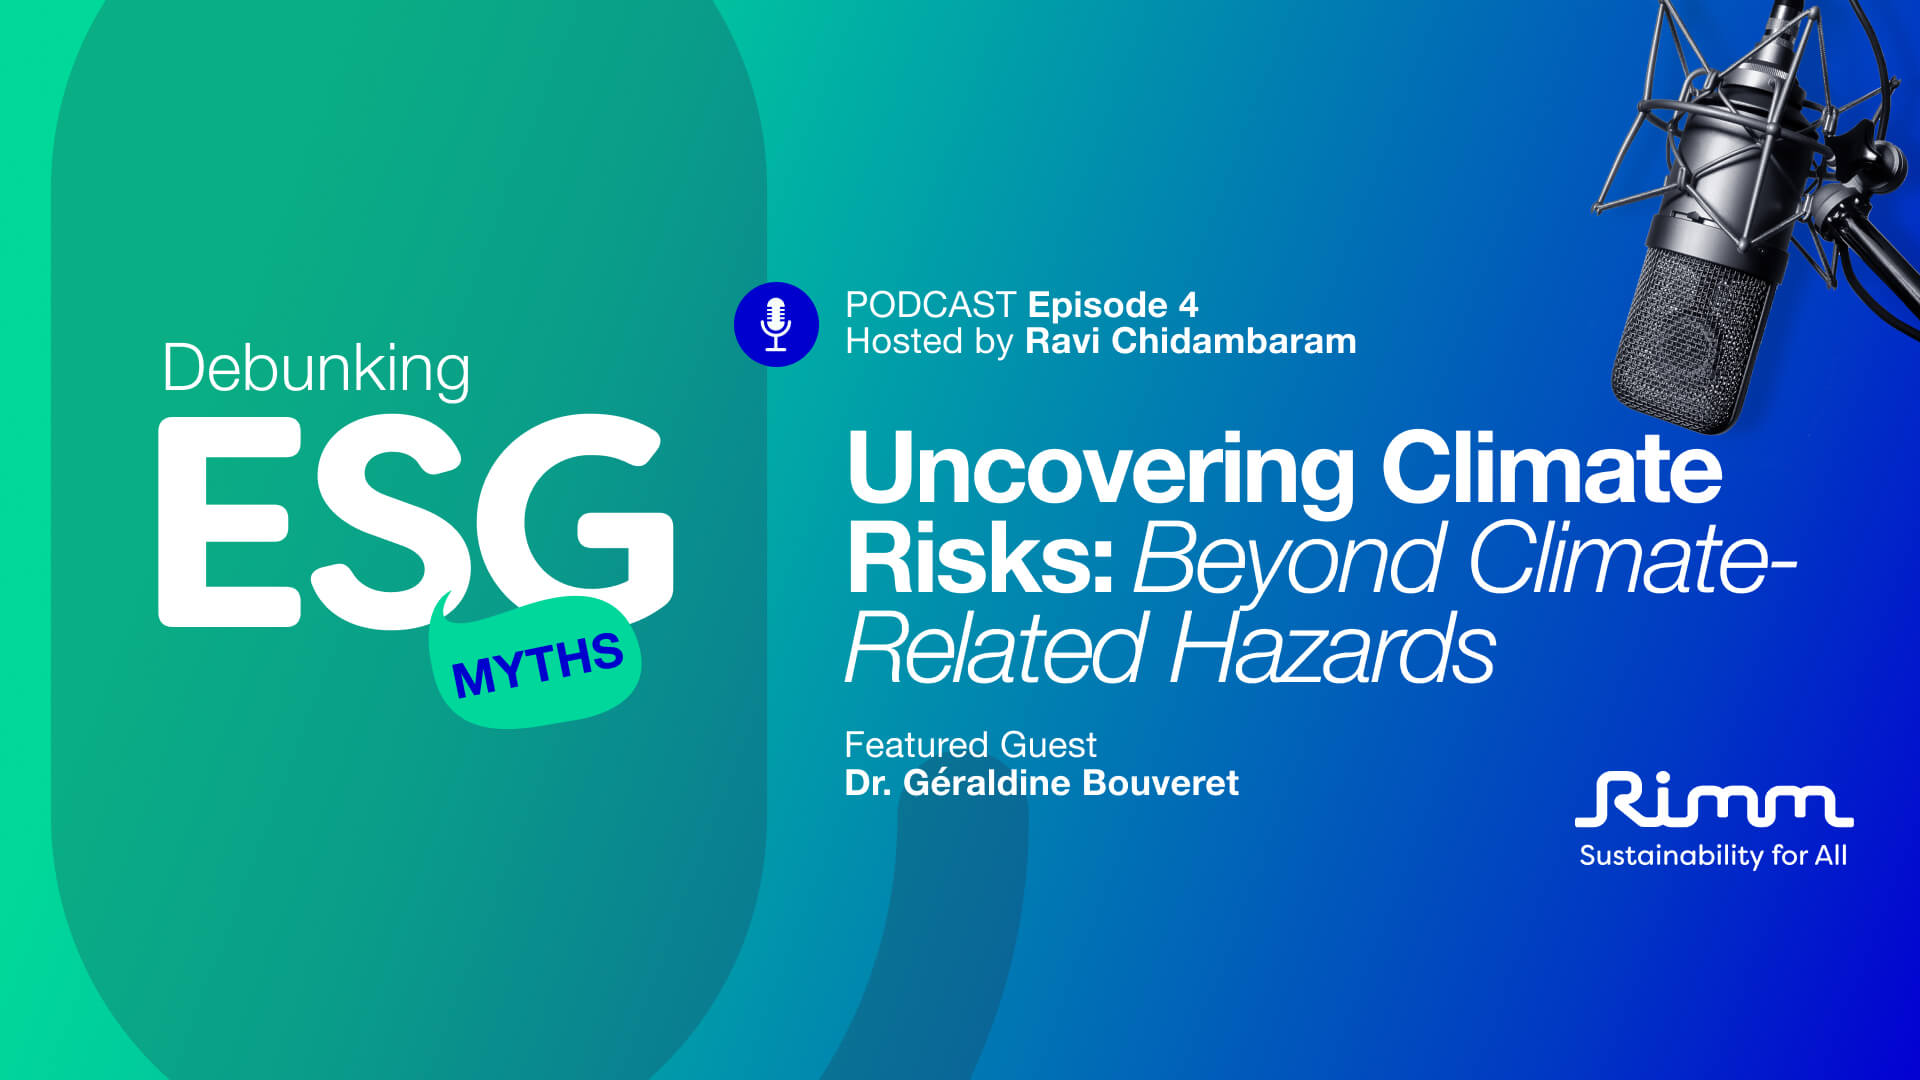 Uncovering Climate Risks: Beyong Climate-Related Hazards